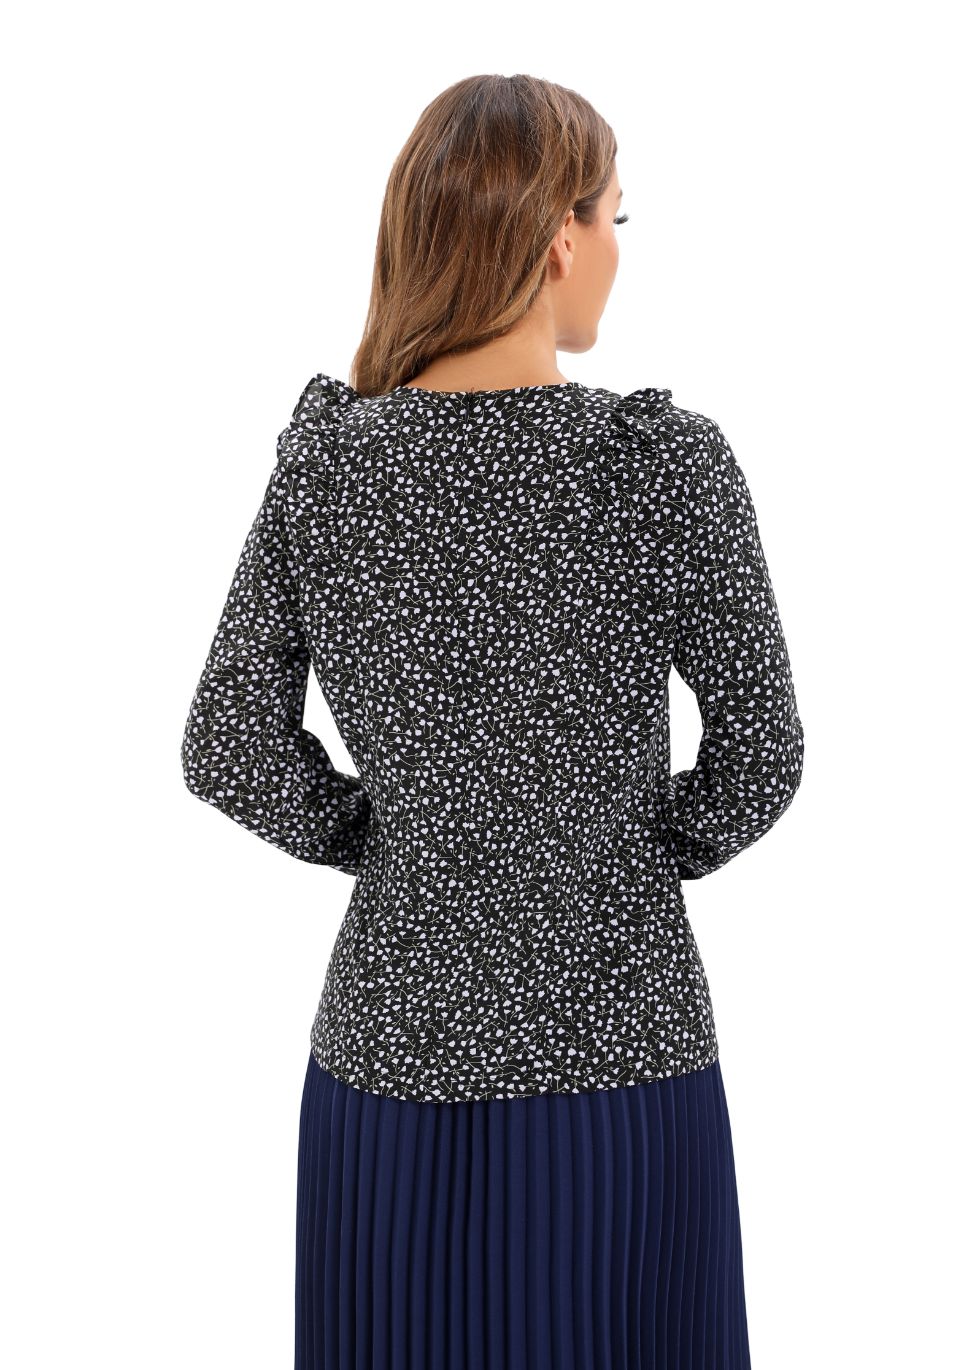 Micro Print Blouse with Long Sleeves and Bib Front - seilerlanguageservices